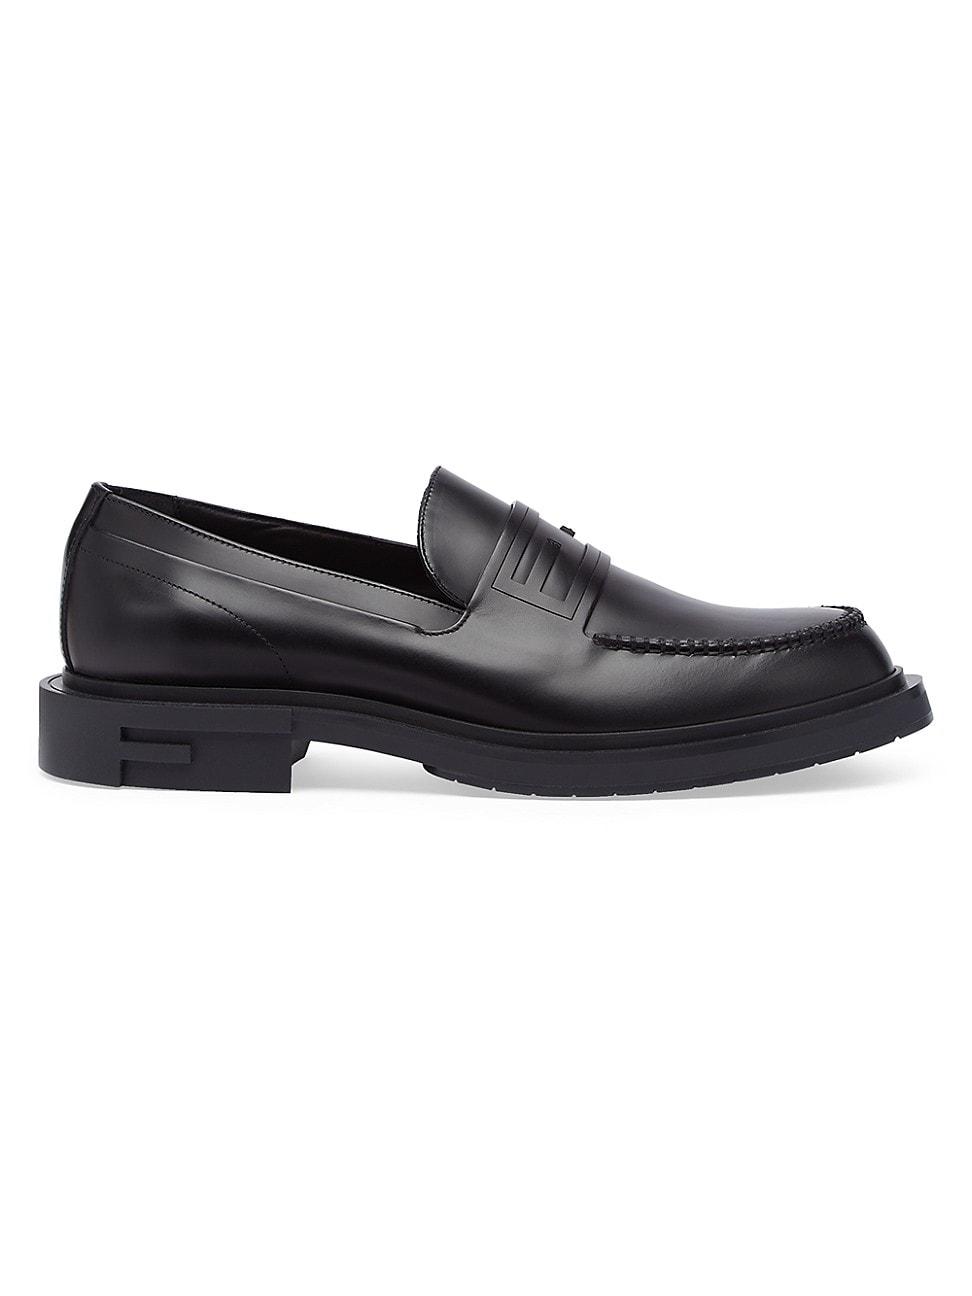 Fendi Leather Stacked Heel Loafers in Black for Men | Lyst